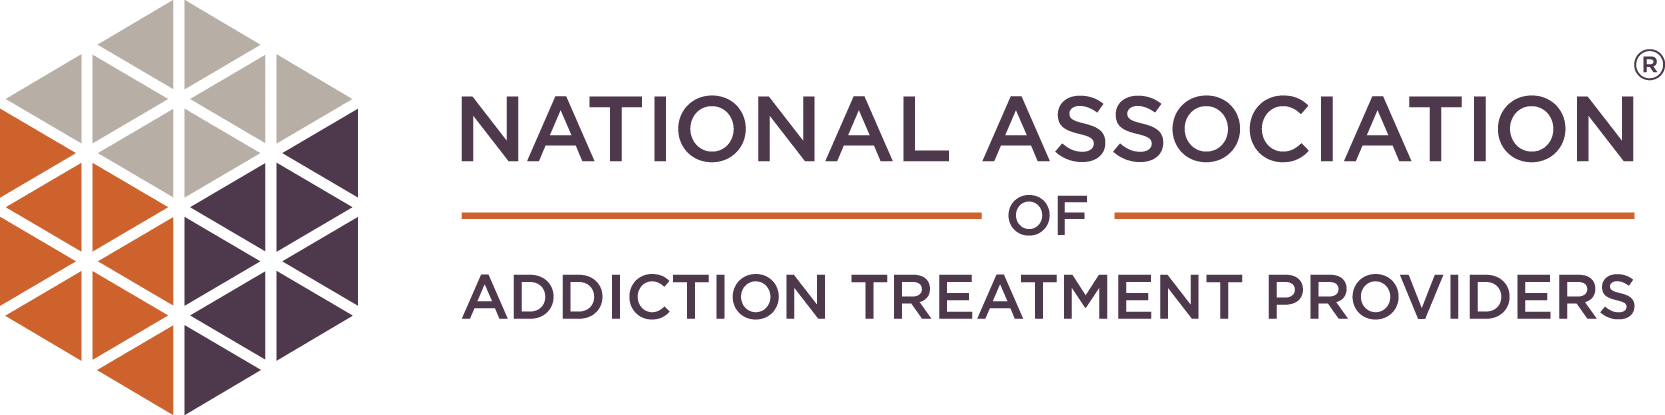 Member of National Association of Addiction Treatment Providers